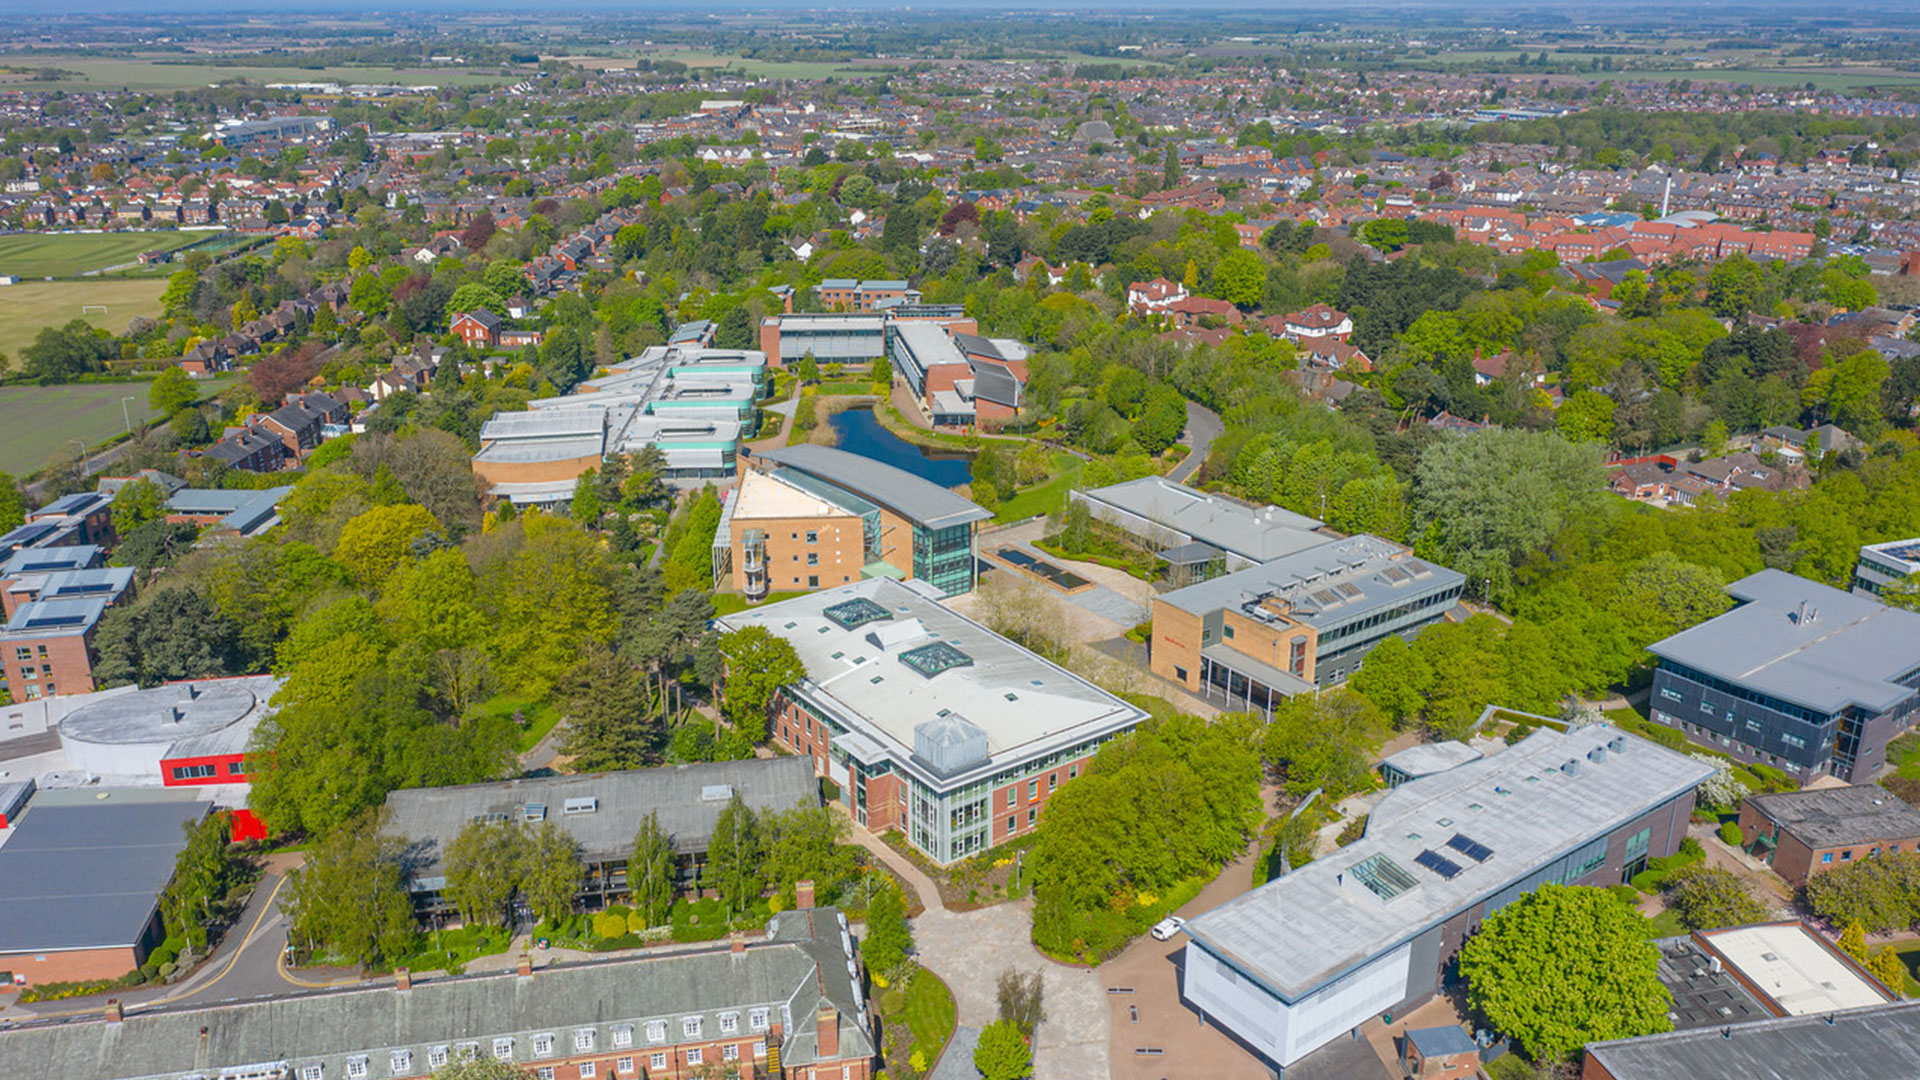 Aerial view of campus with the Law and Psychology building as the central focal point,